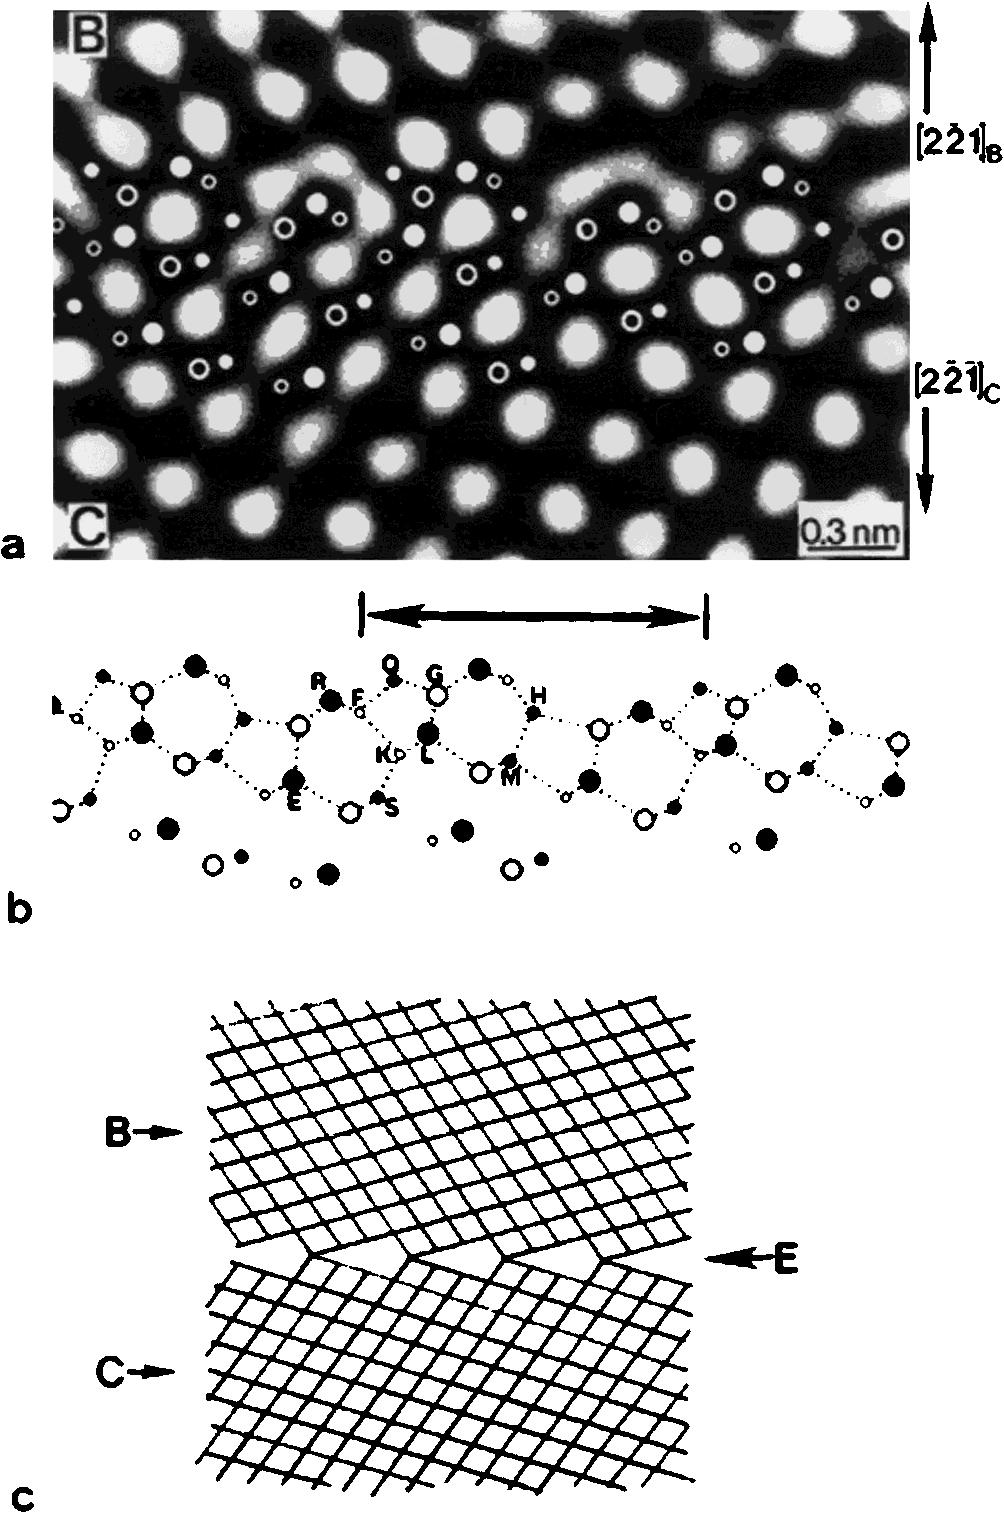 Jpn. J. Appl. Phys. Vol. 40 (2001) Pt. 1, No. 7 N.-H. CHO and C. B. CARTER 4463 Fig. 9. (a) Atomic sites are superimposed on dark spots near boundary JK in Fig. 6.